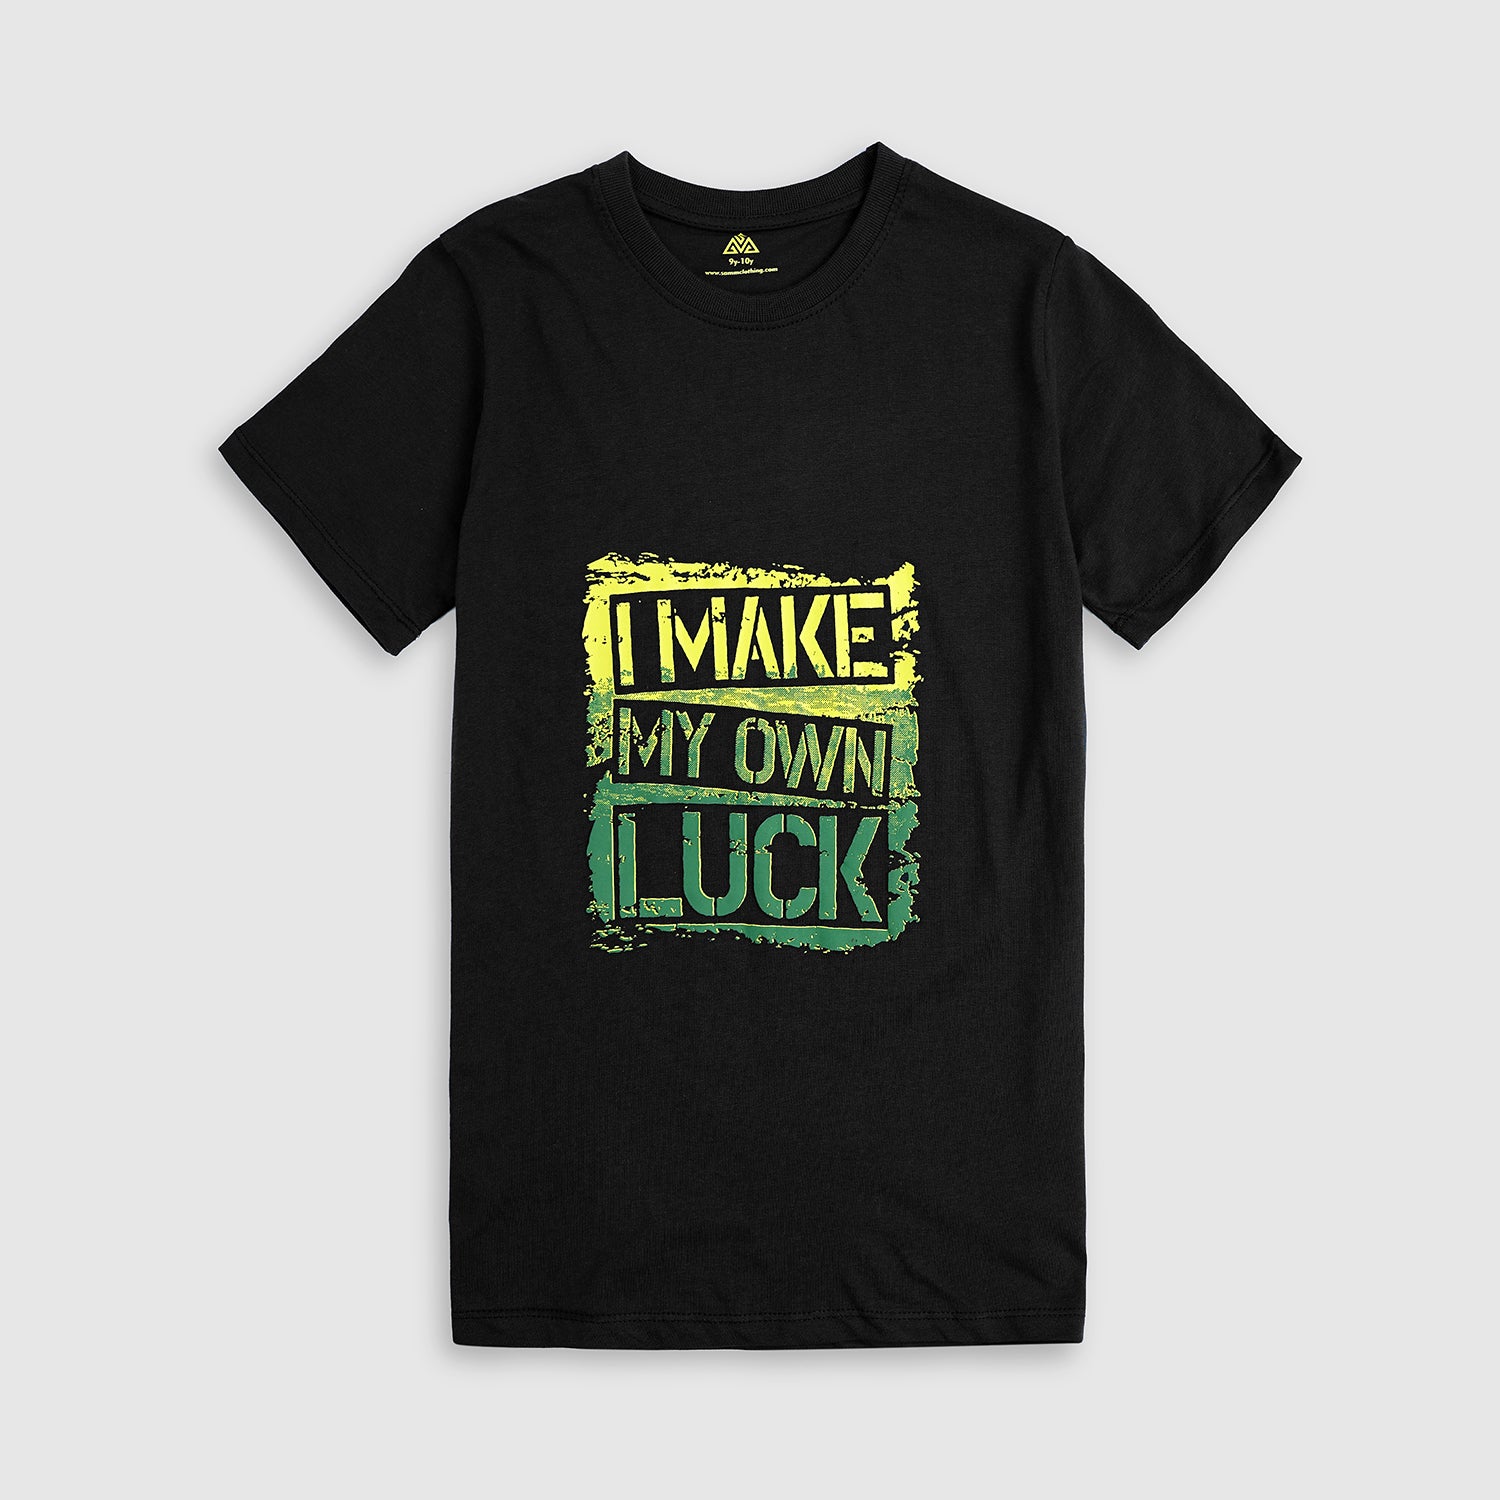 Pure Cotton " Make your own luck" Graphic Tee Shirt for kids (7Yrs - 14 Yrs)